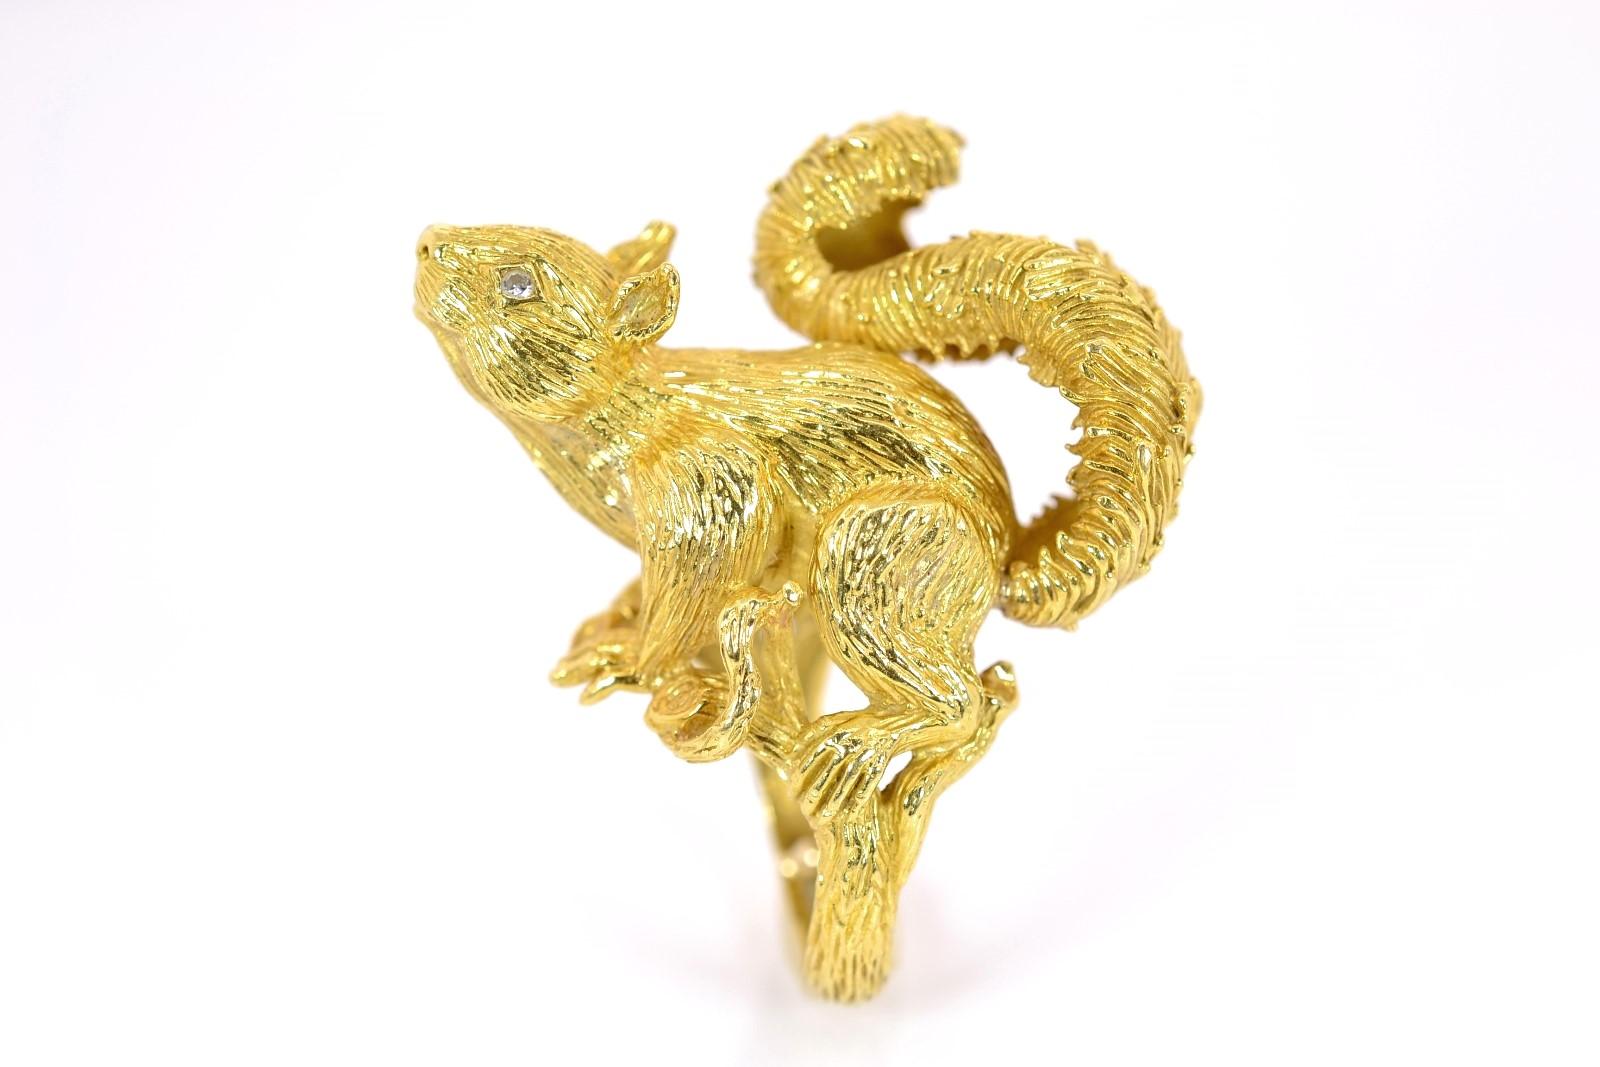 From renown American jeweler Kurt Wayne comes this whimsical and one-of-a-kind Squirrel ring.  Hand-sculpted of rich 18KT gold it charms us with its real life appearance depicting the adorable critter poised for action.  As a touch, the sparkly